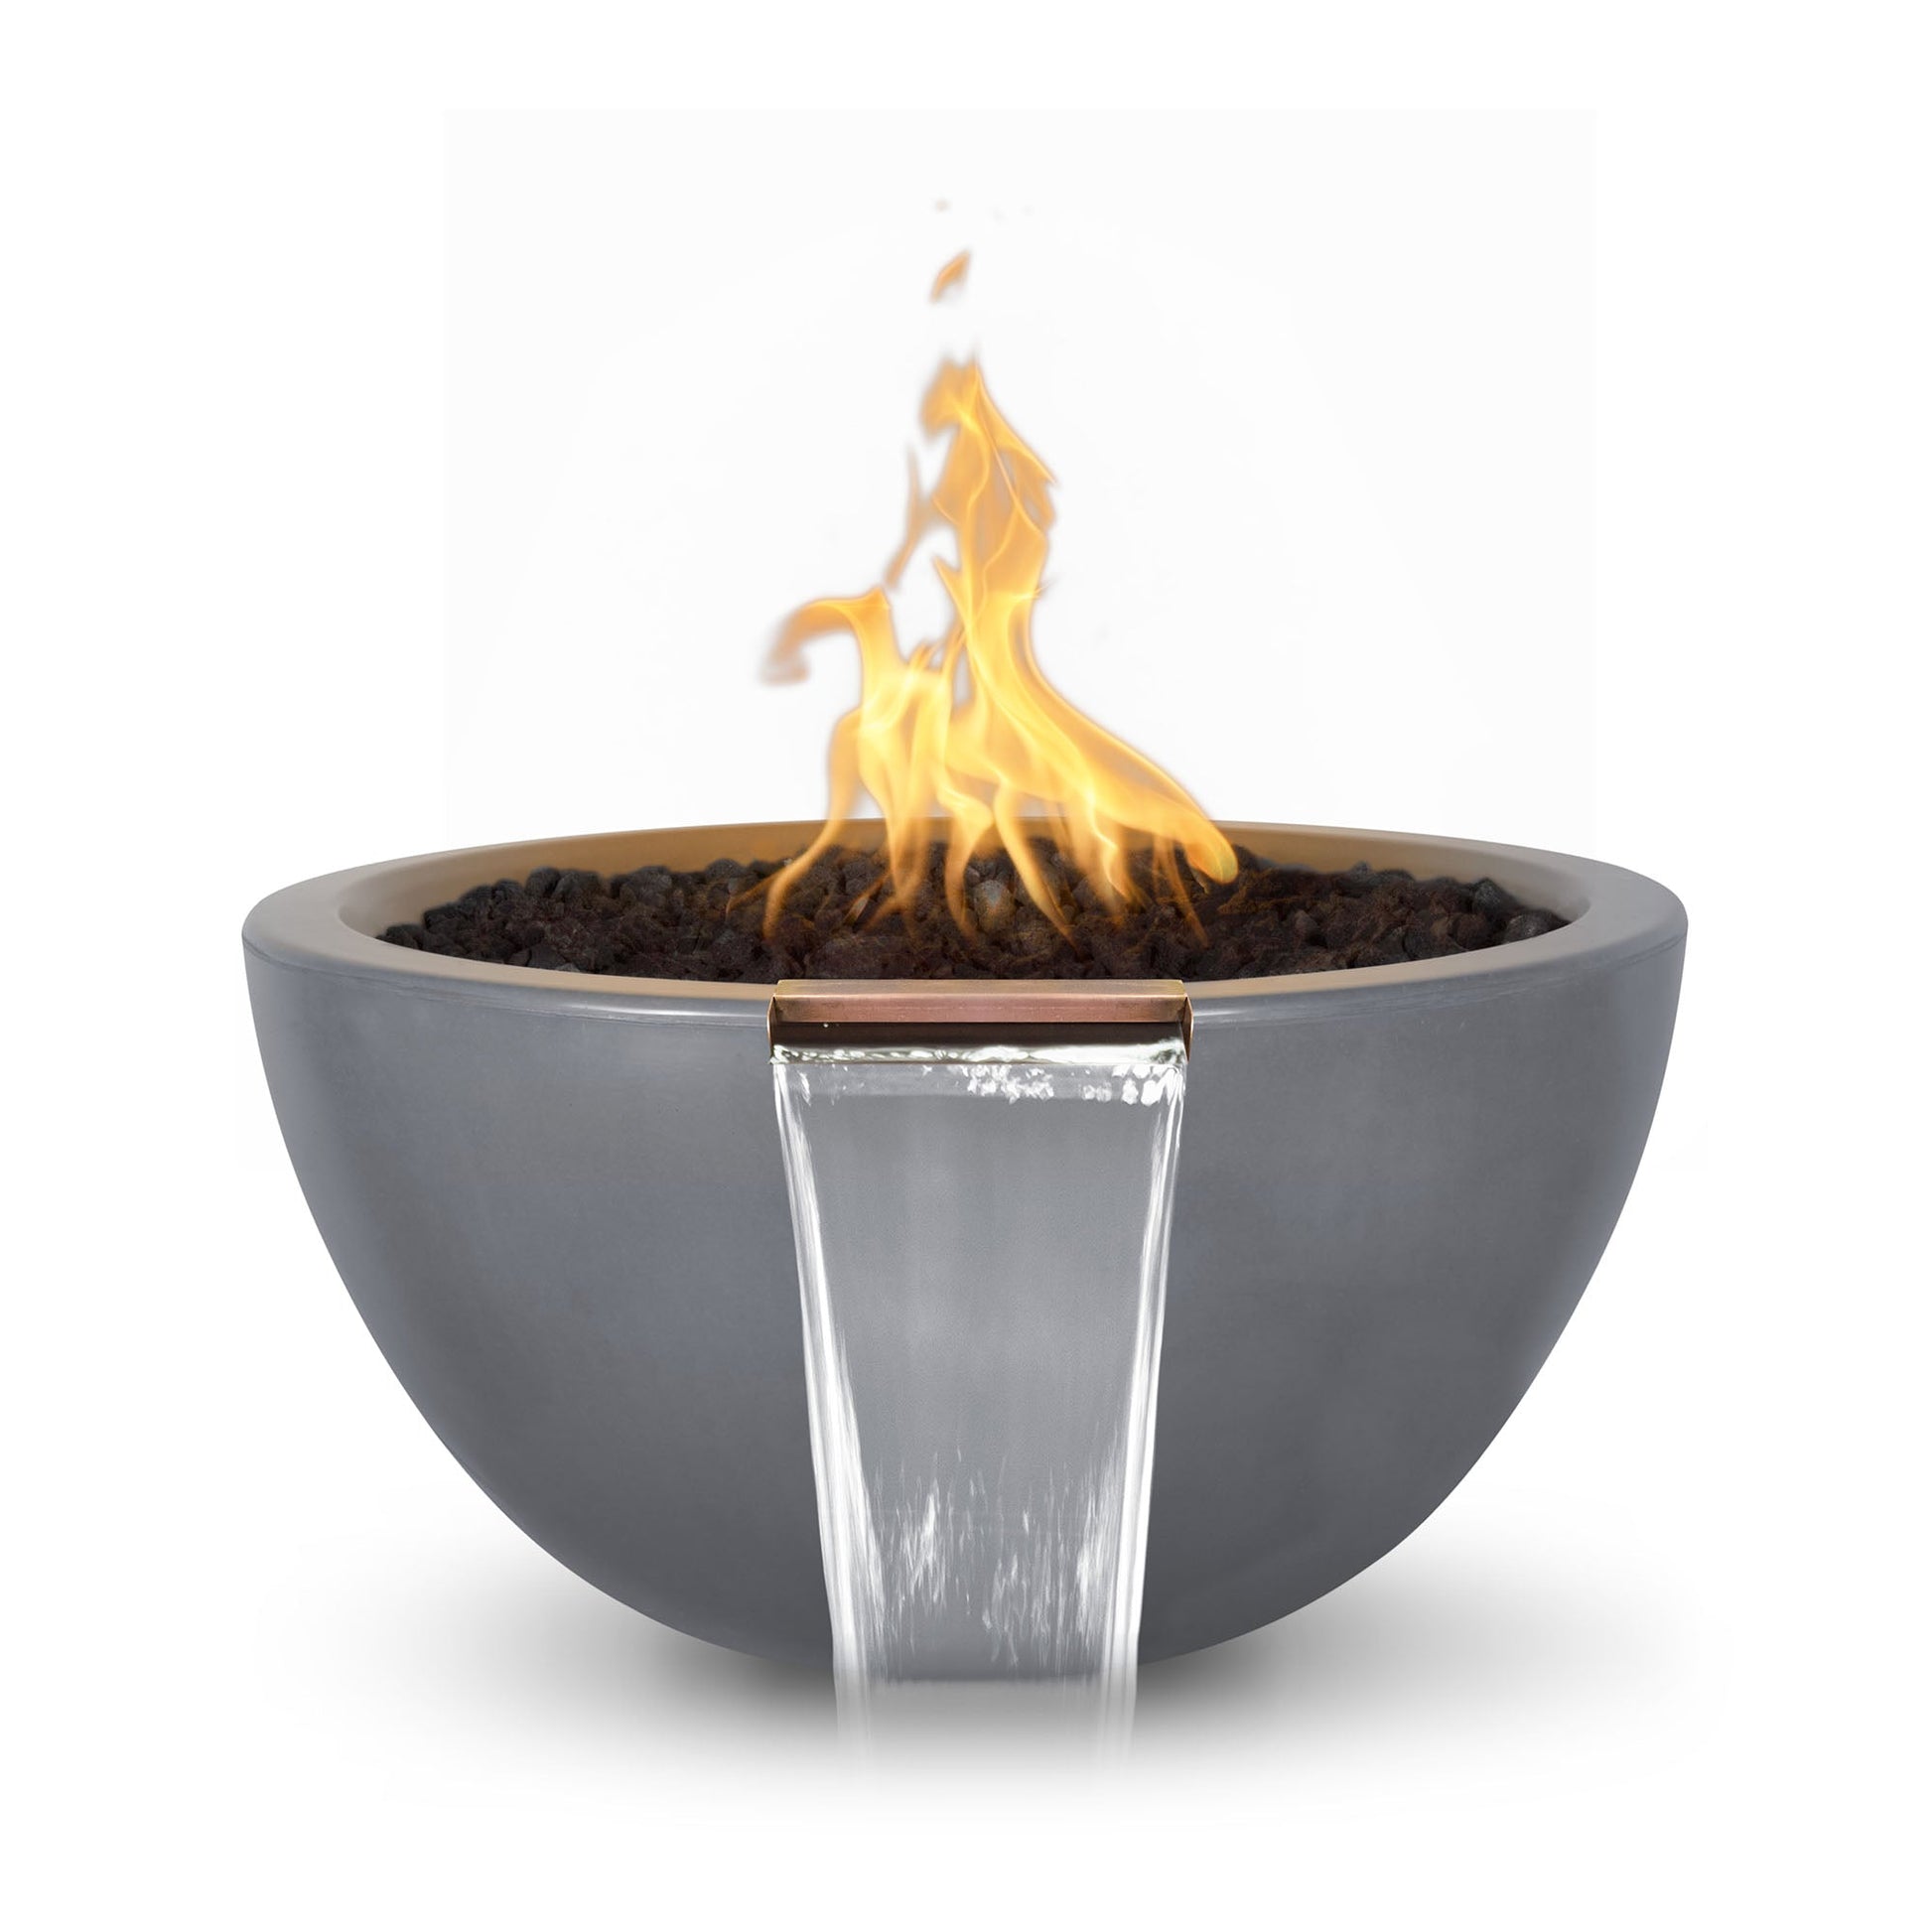 The Outdoor Plus Round Luna 30" Rustic Gray GFRC Concrete Liquid Propane Fire & Water Bowl with Match Lit with Flame Sense Ignition